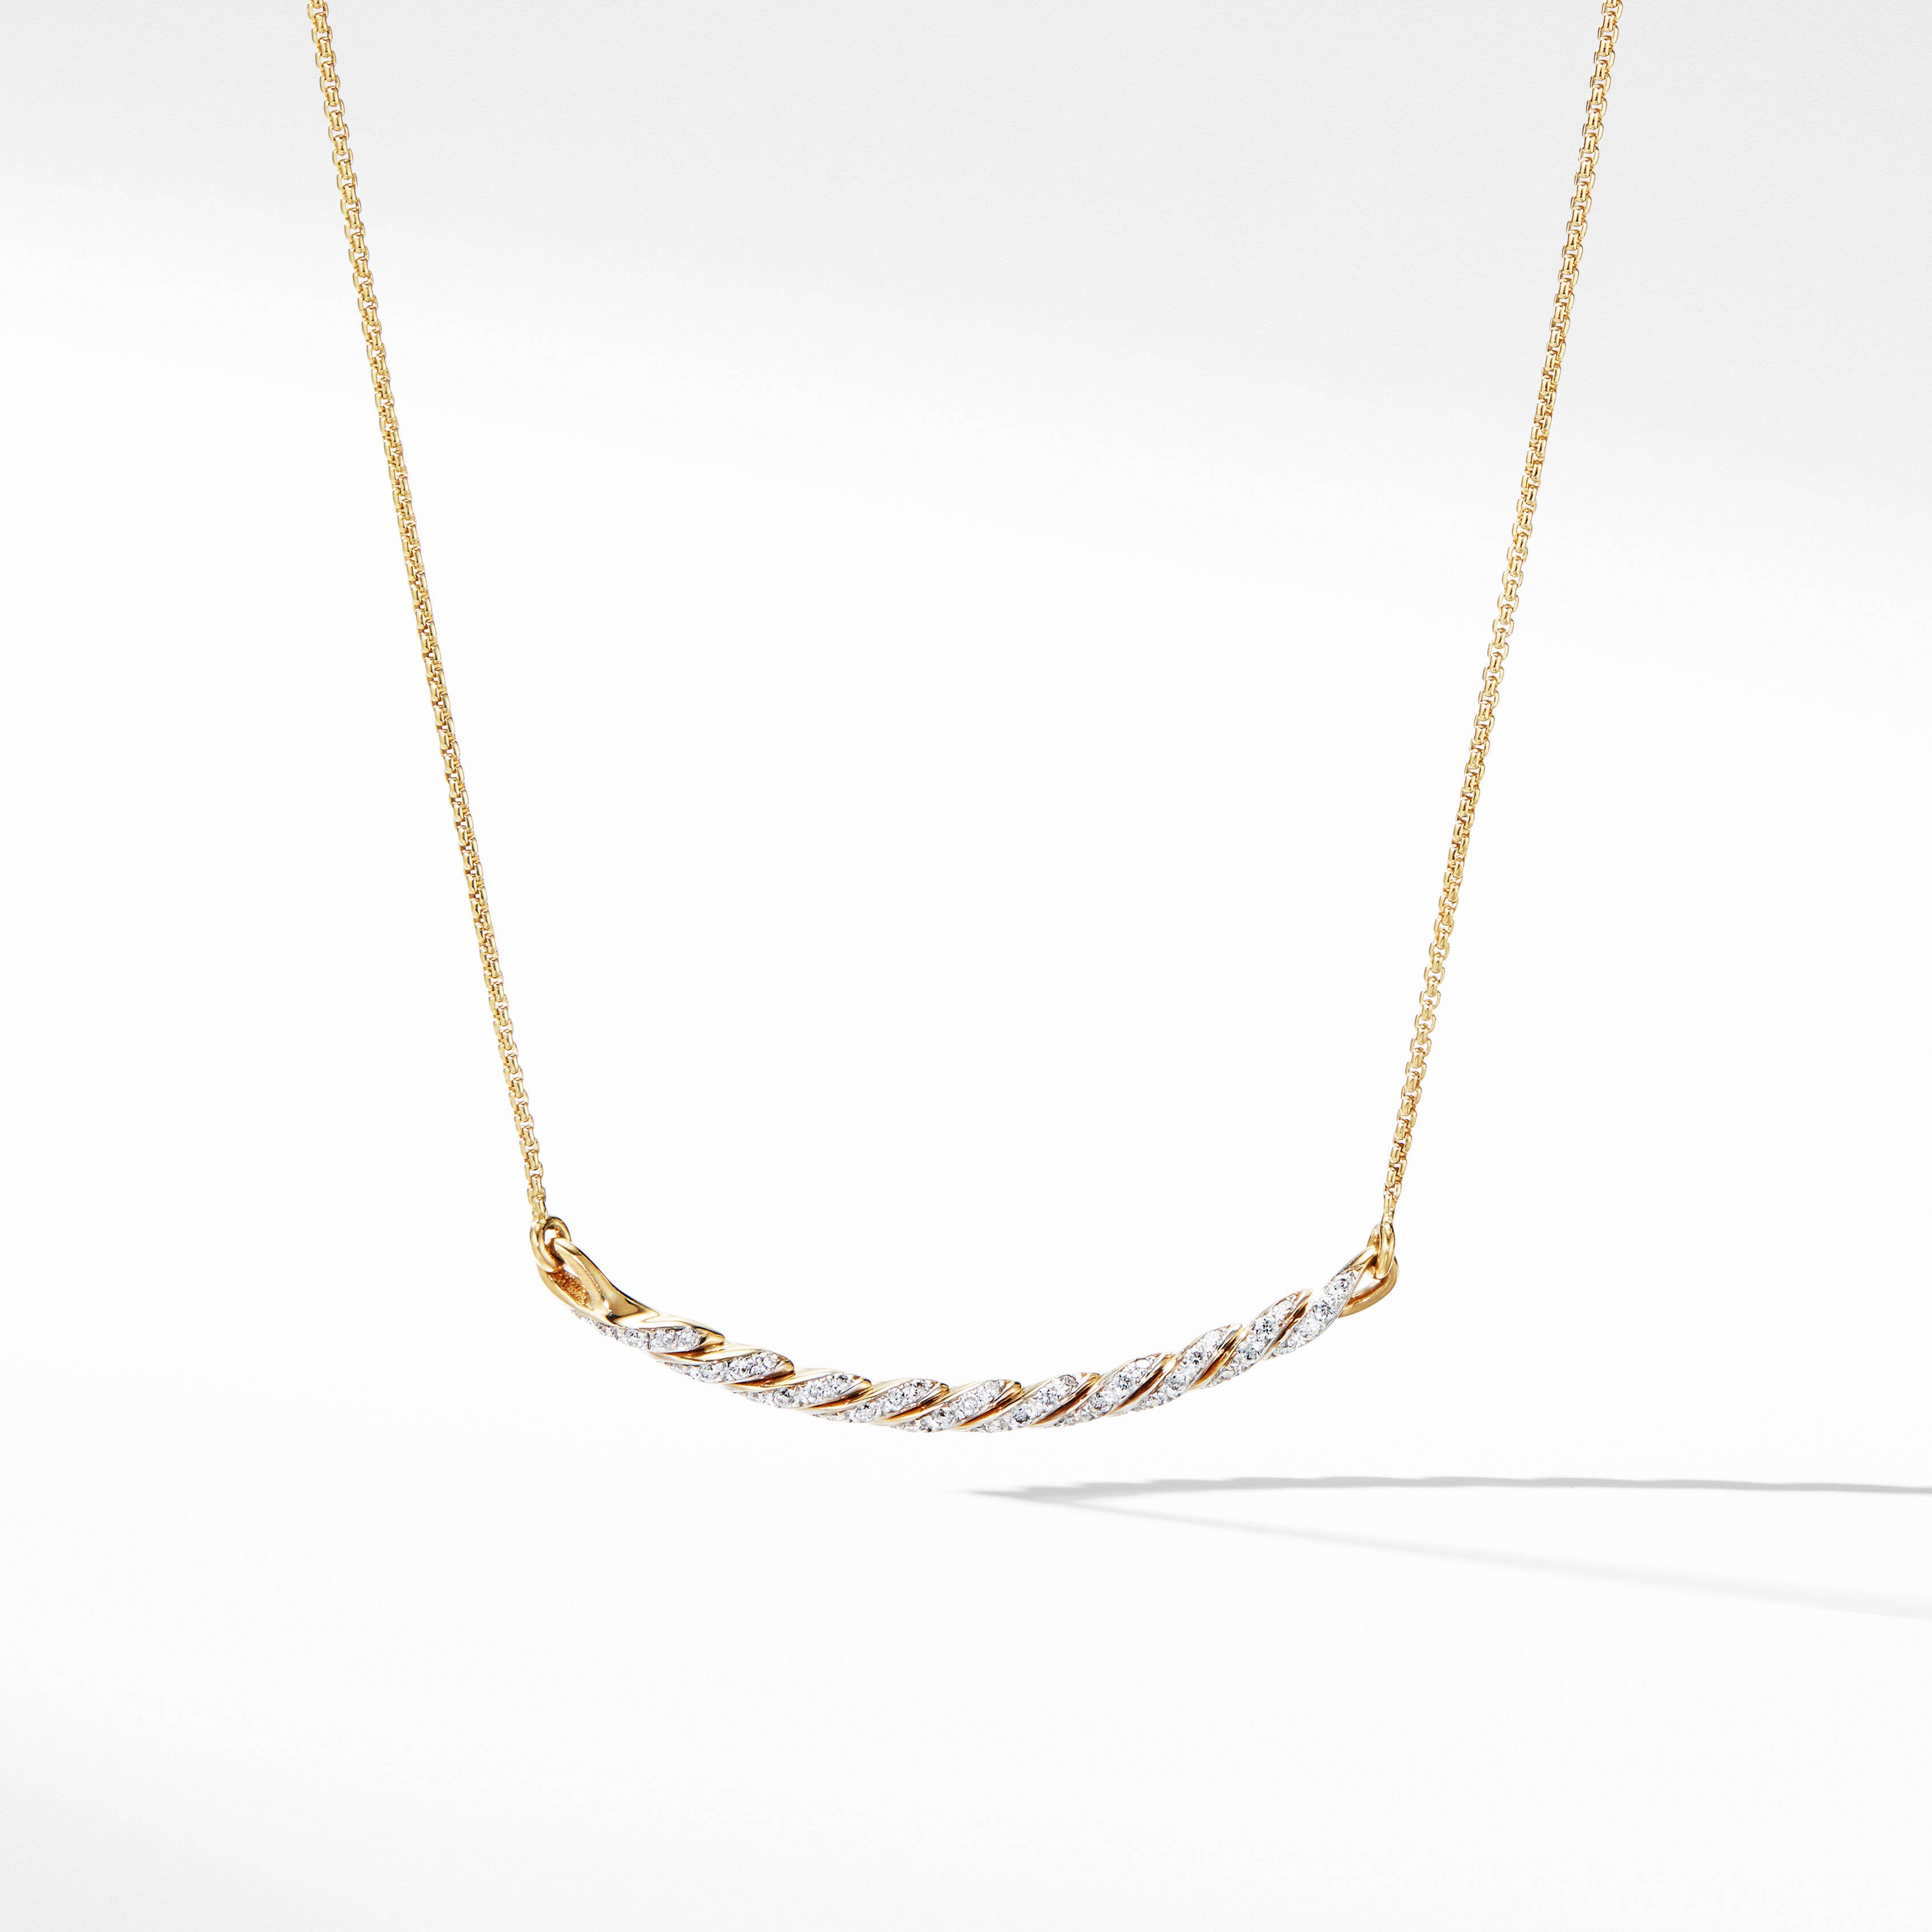 Petite Pavé Station Necklace in 18K Yellow Gold with Diamonds